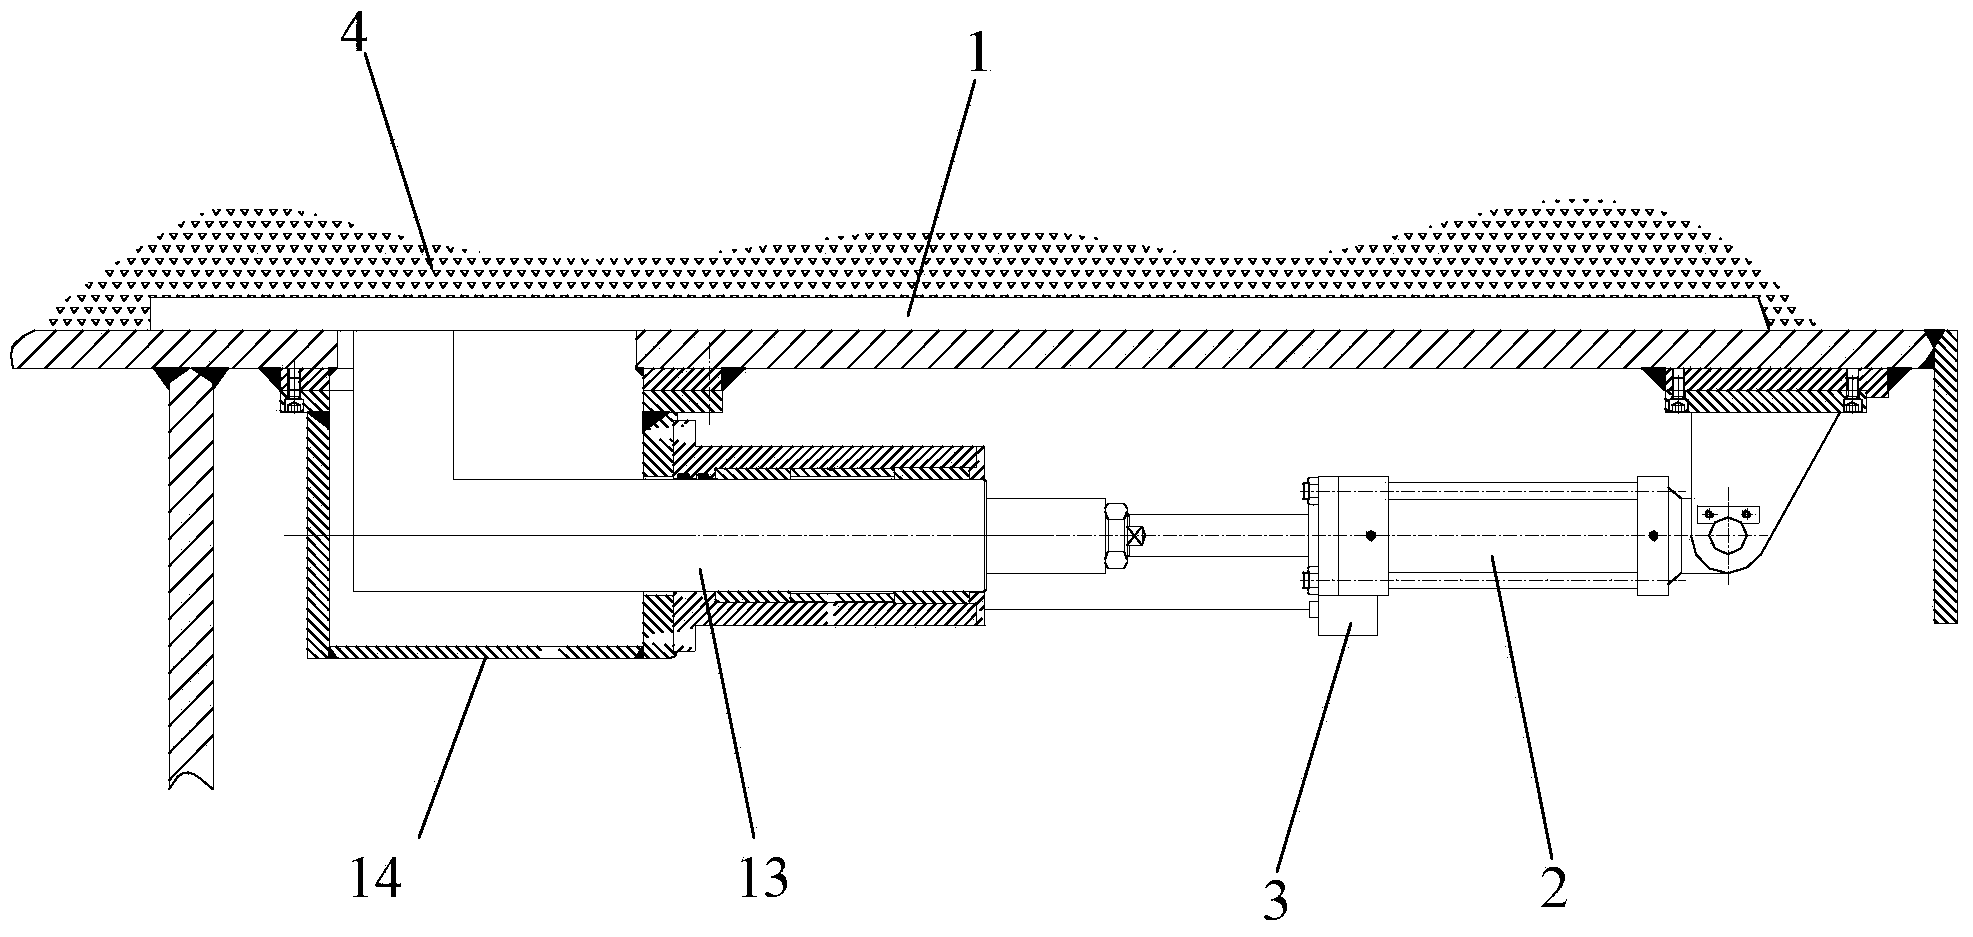 Covering earth prevention system of rectangular shield tunneling machine and control method of covering earth prevention system